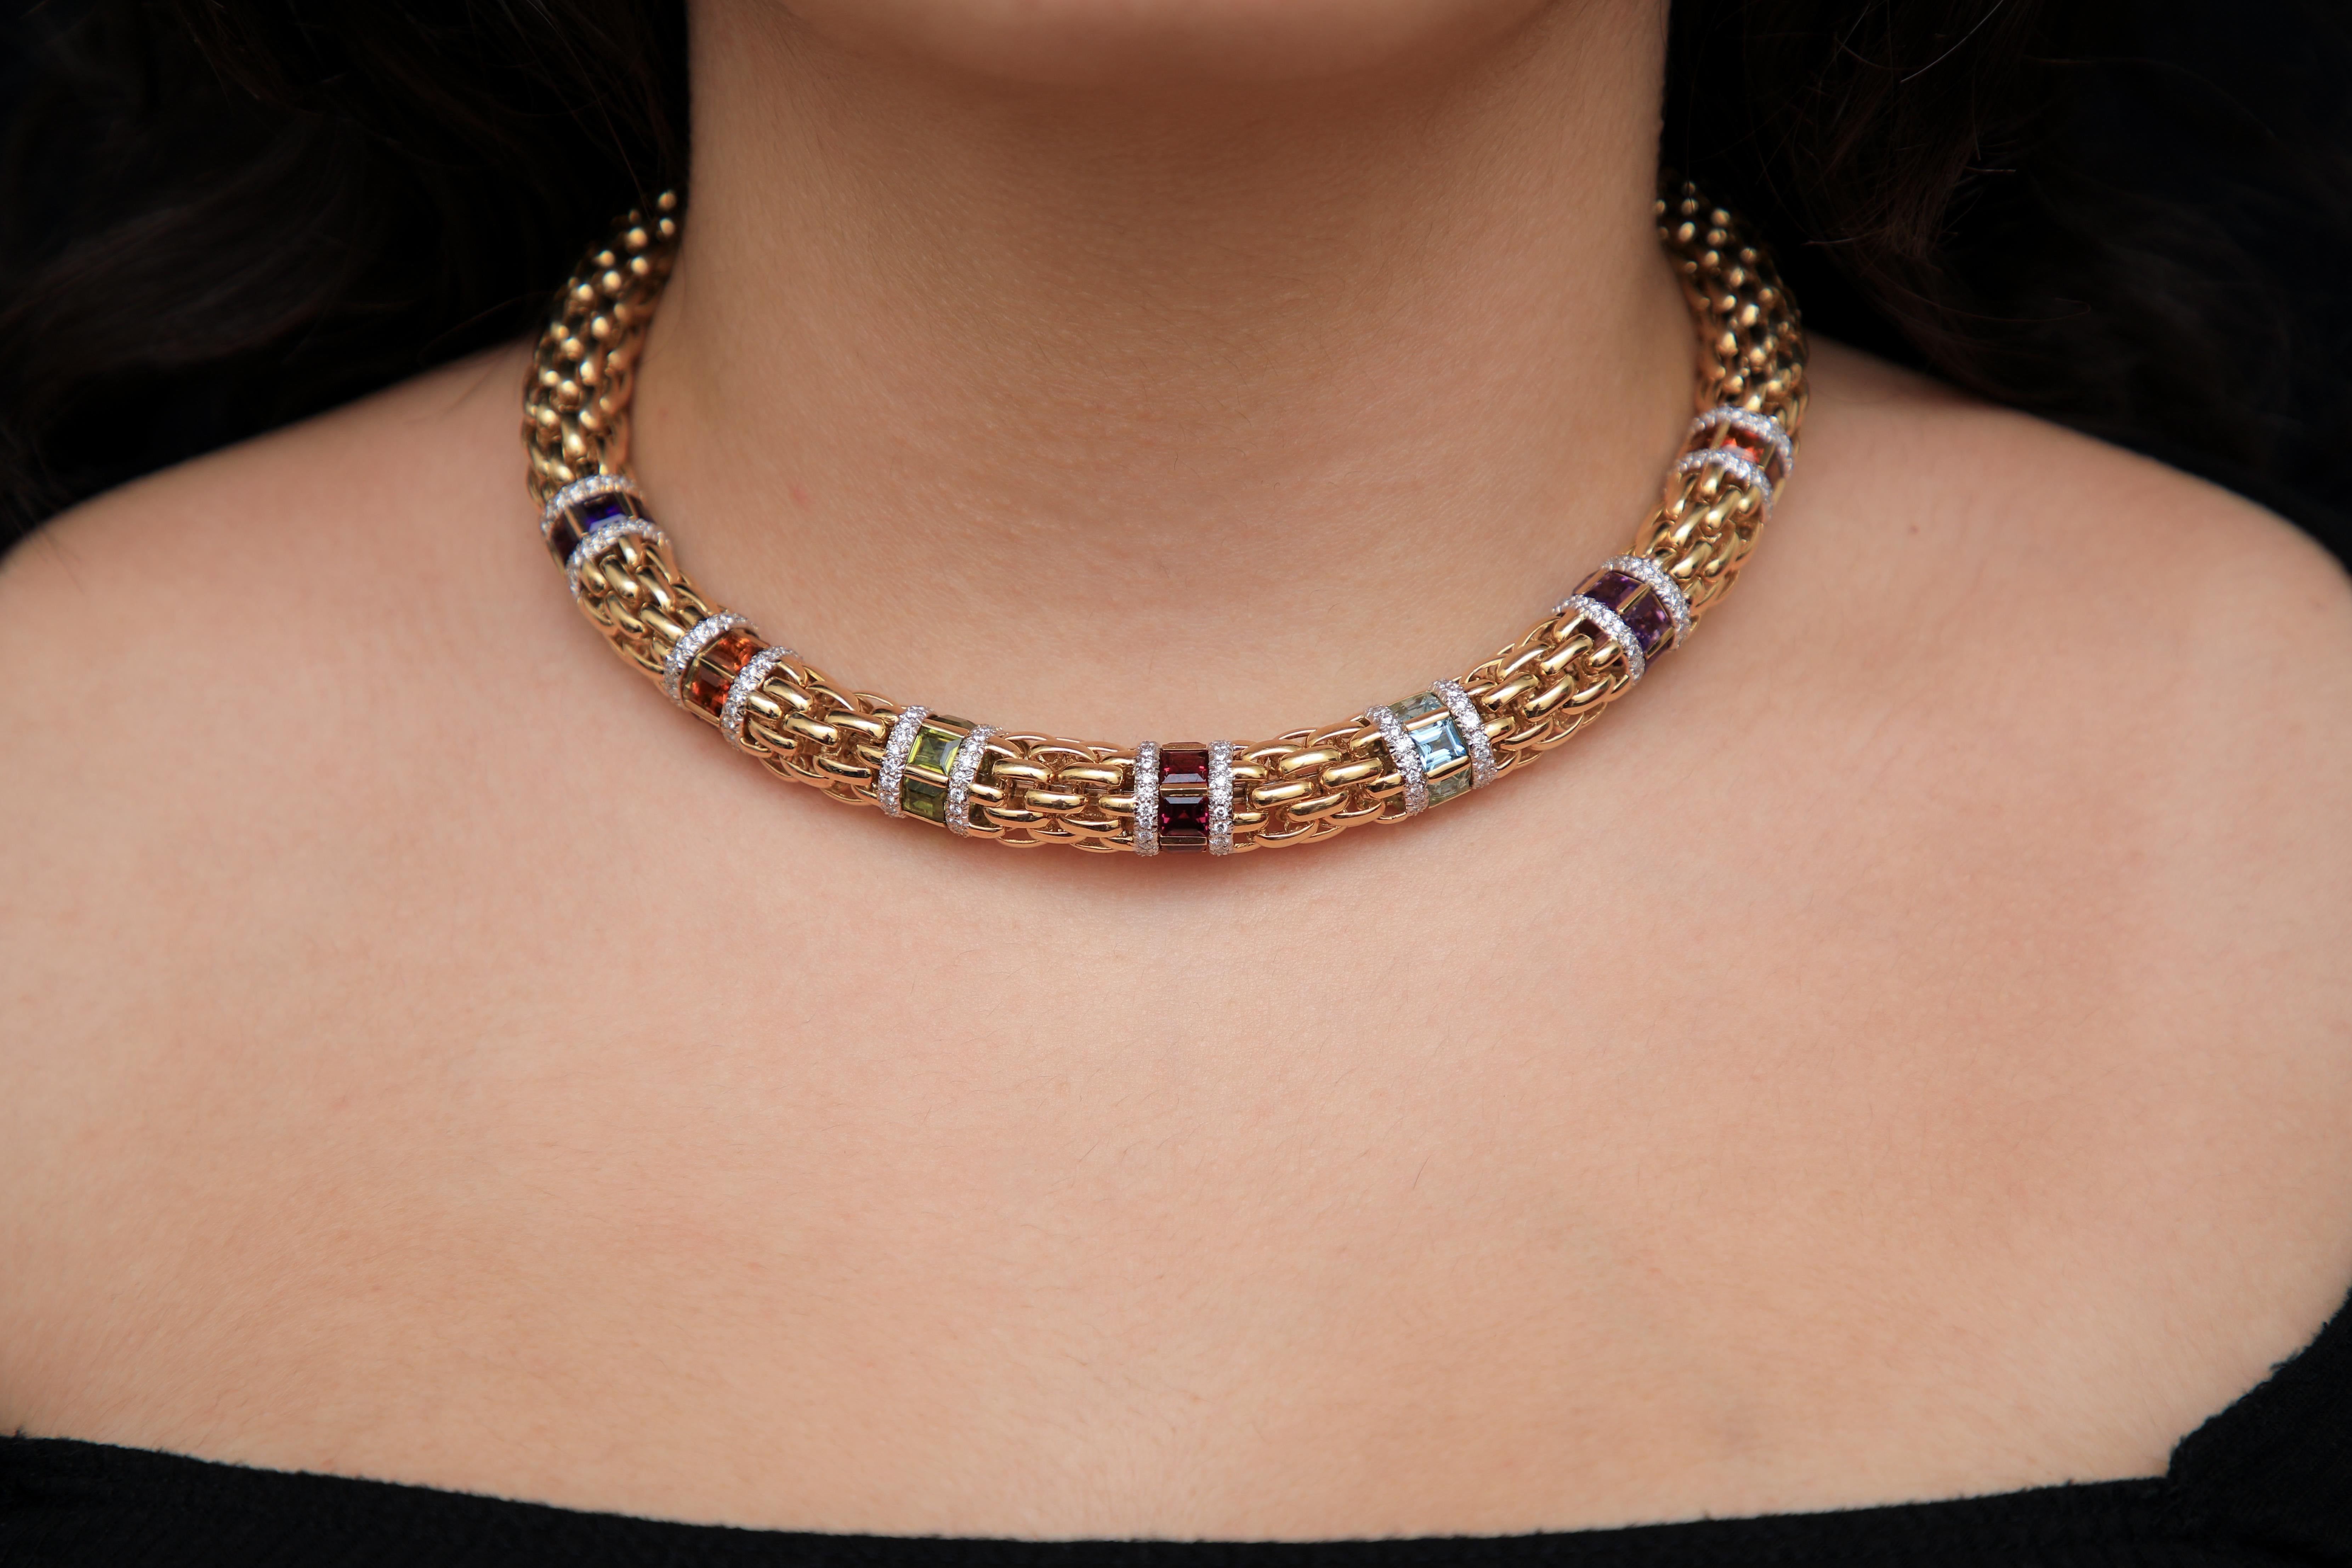 Solid Heavy 18 Karat Gold Multi-Color Gemstone Choker Necklace
Multi color necklace to make a breathtaking statement. Listed above is a solid 18k Italian flexible collar mesh link necklace of 168.5 grams. Approximately 7.0 carats of diamonds F-G